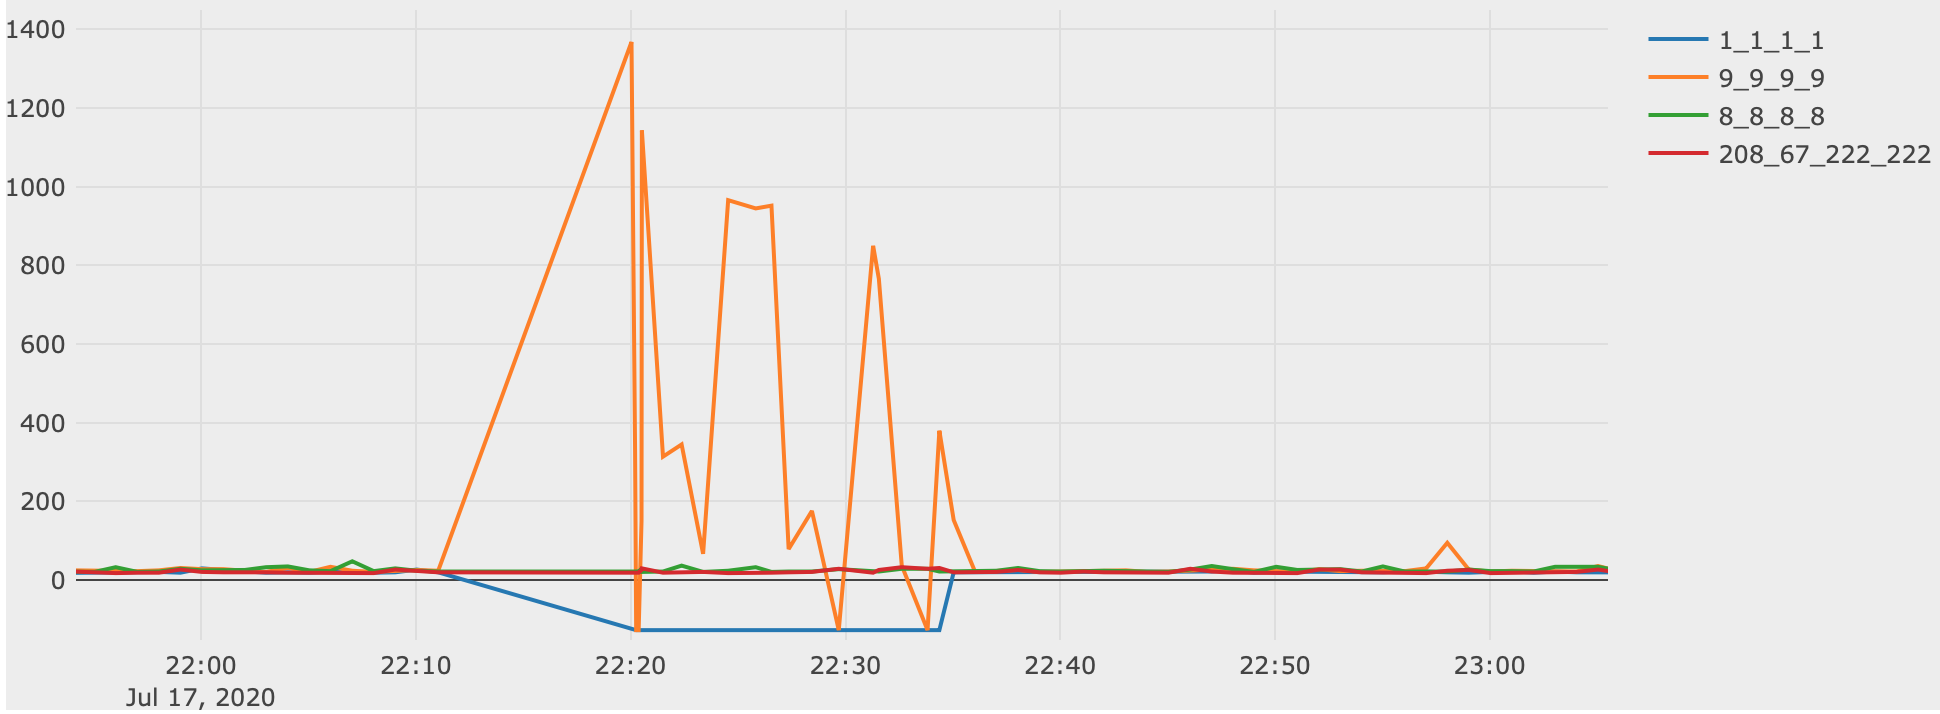 IoTplotter graph showing DNS response times during an outage